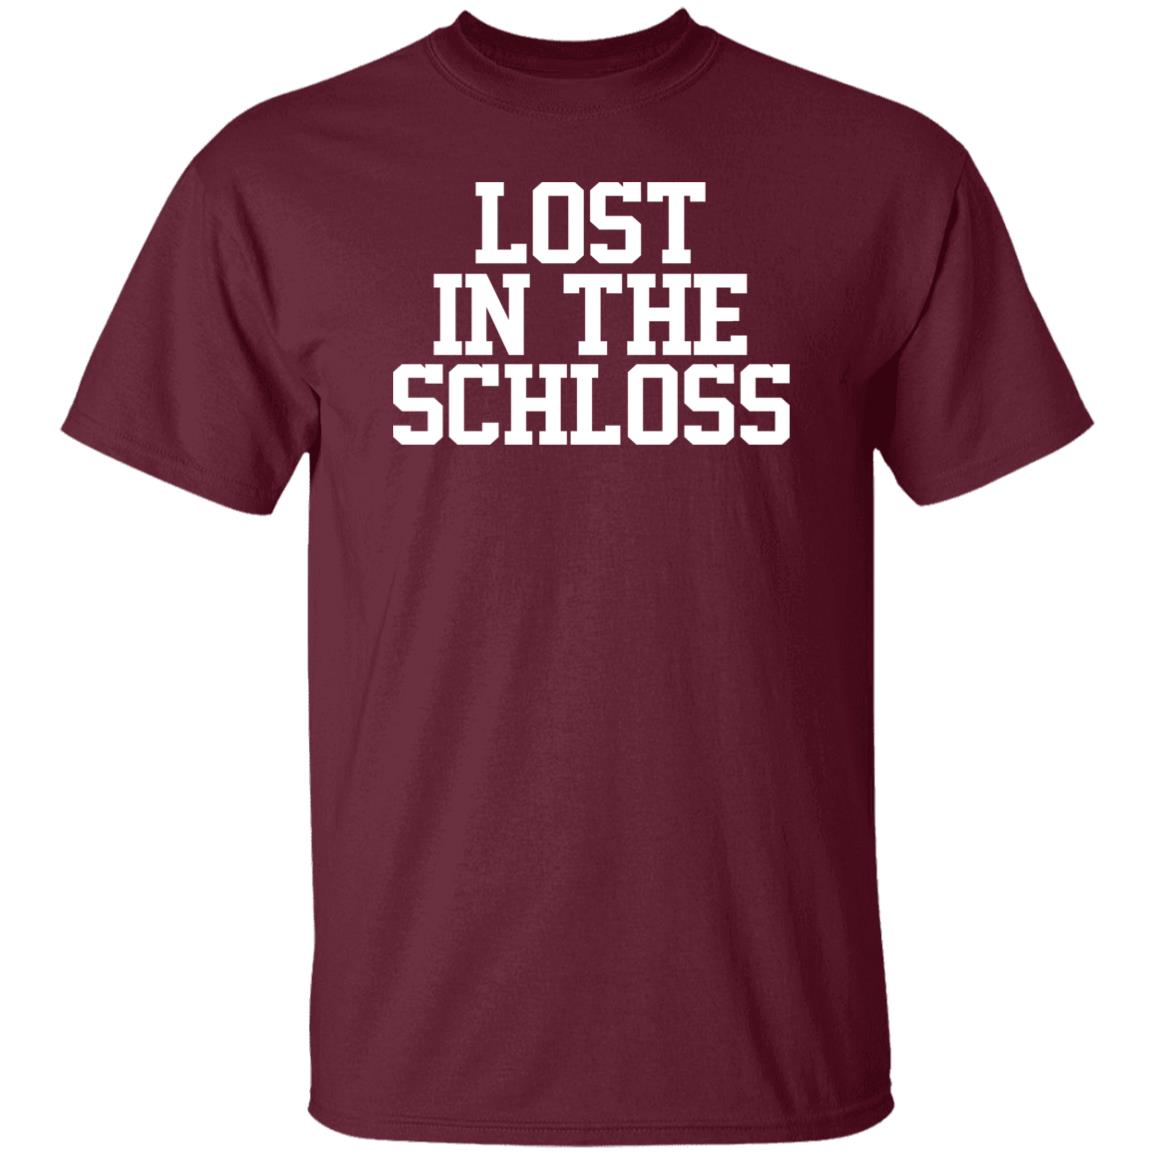 Lost In The Schloss Shirt Barstool Sports Store #5 Lost In The Schloss Barstool Texas A&M